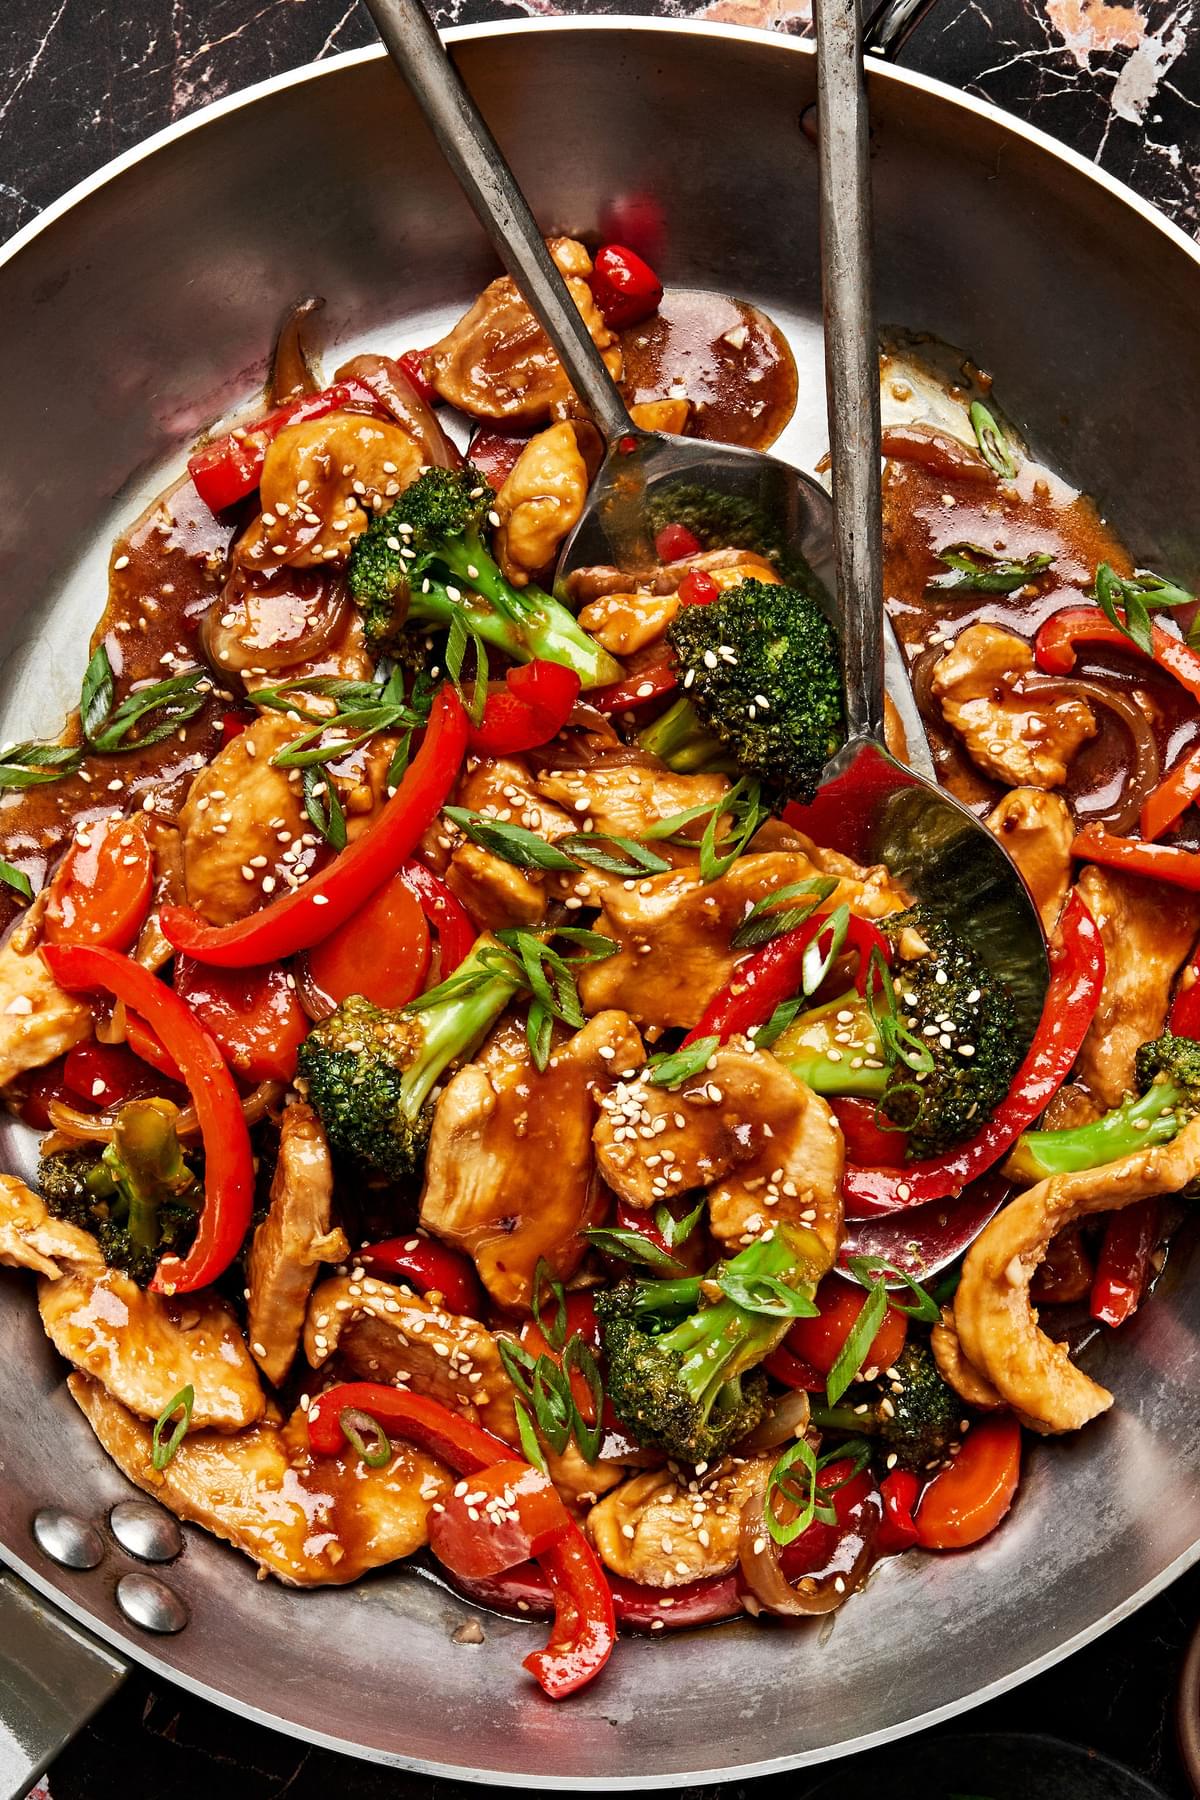 chicken stir fry in a pan made with broccoli, onion, bell pepper, carrots and homemade stir fry sauce